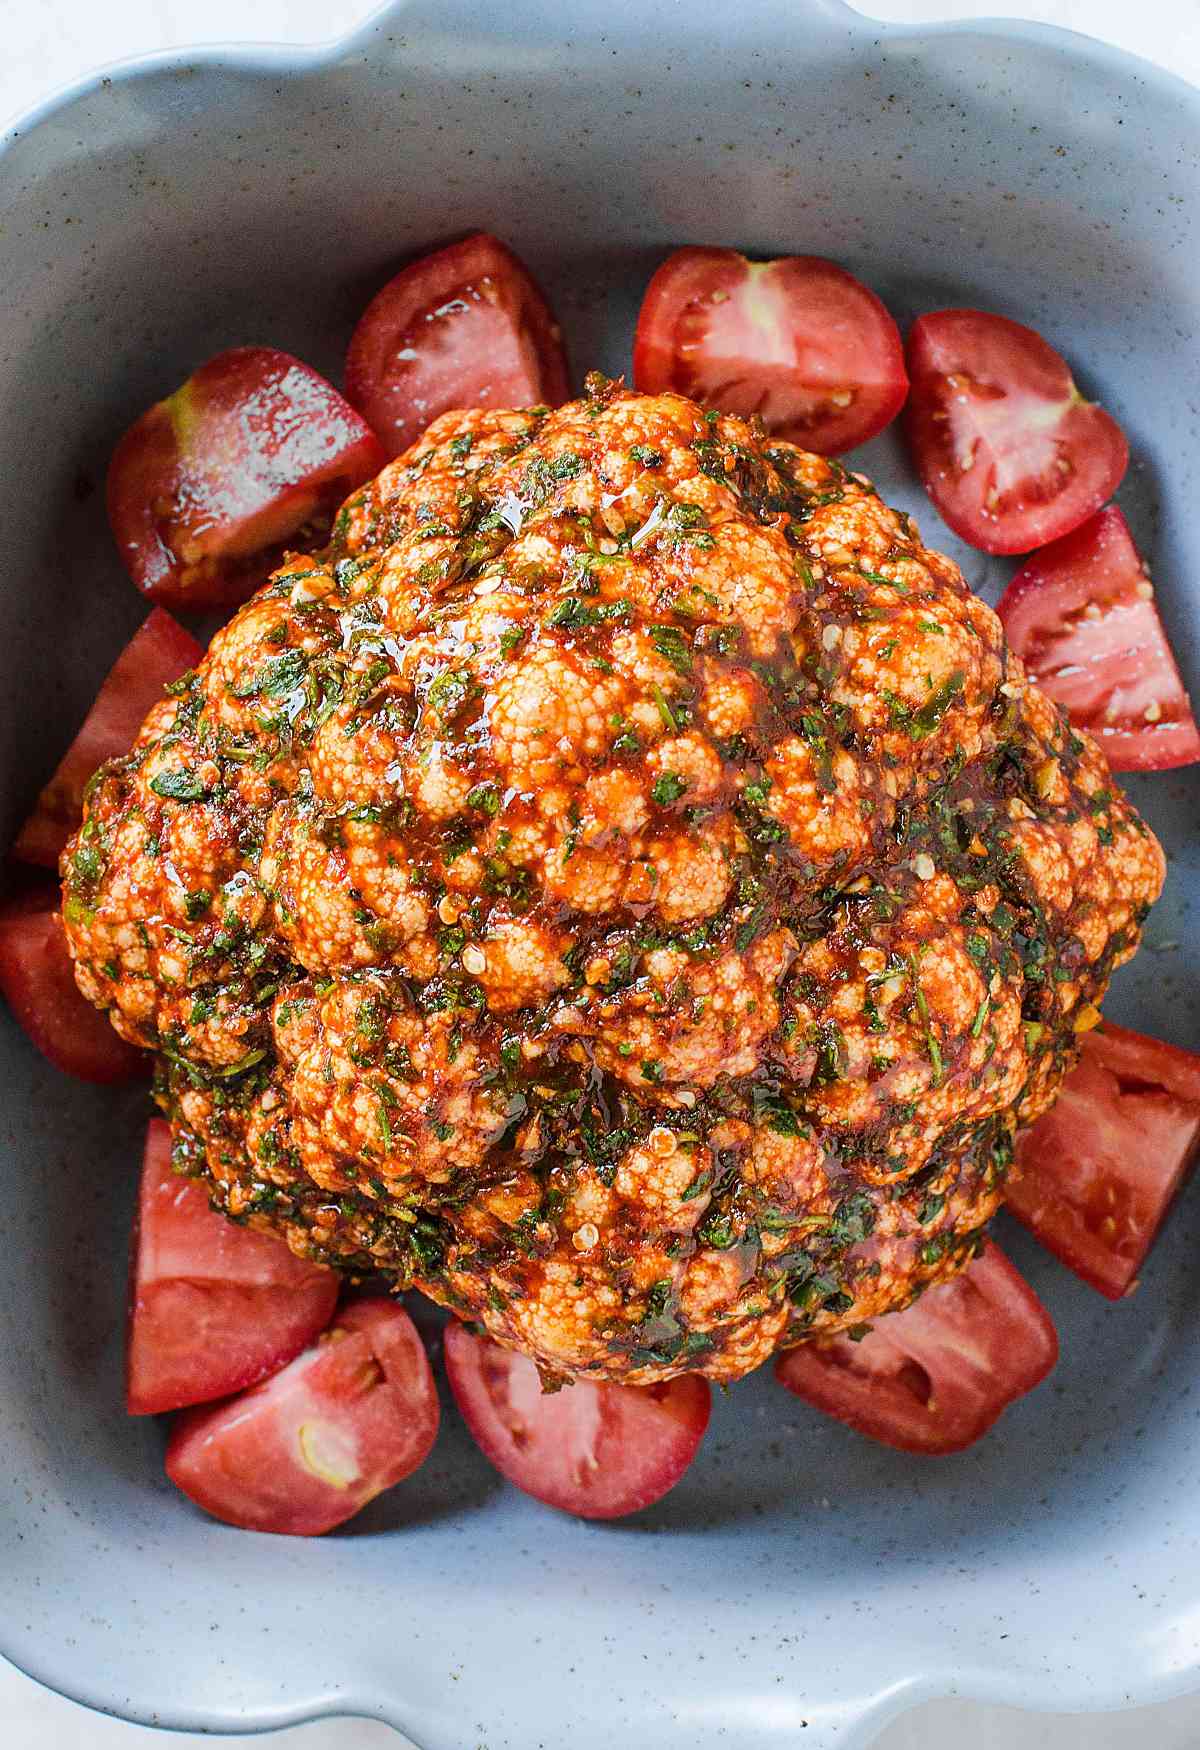 Whole cauliflower with tomatoes and herbs in baking dish and is ready to bake.